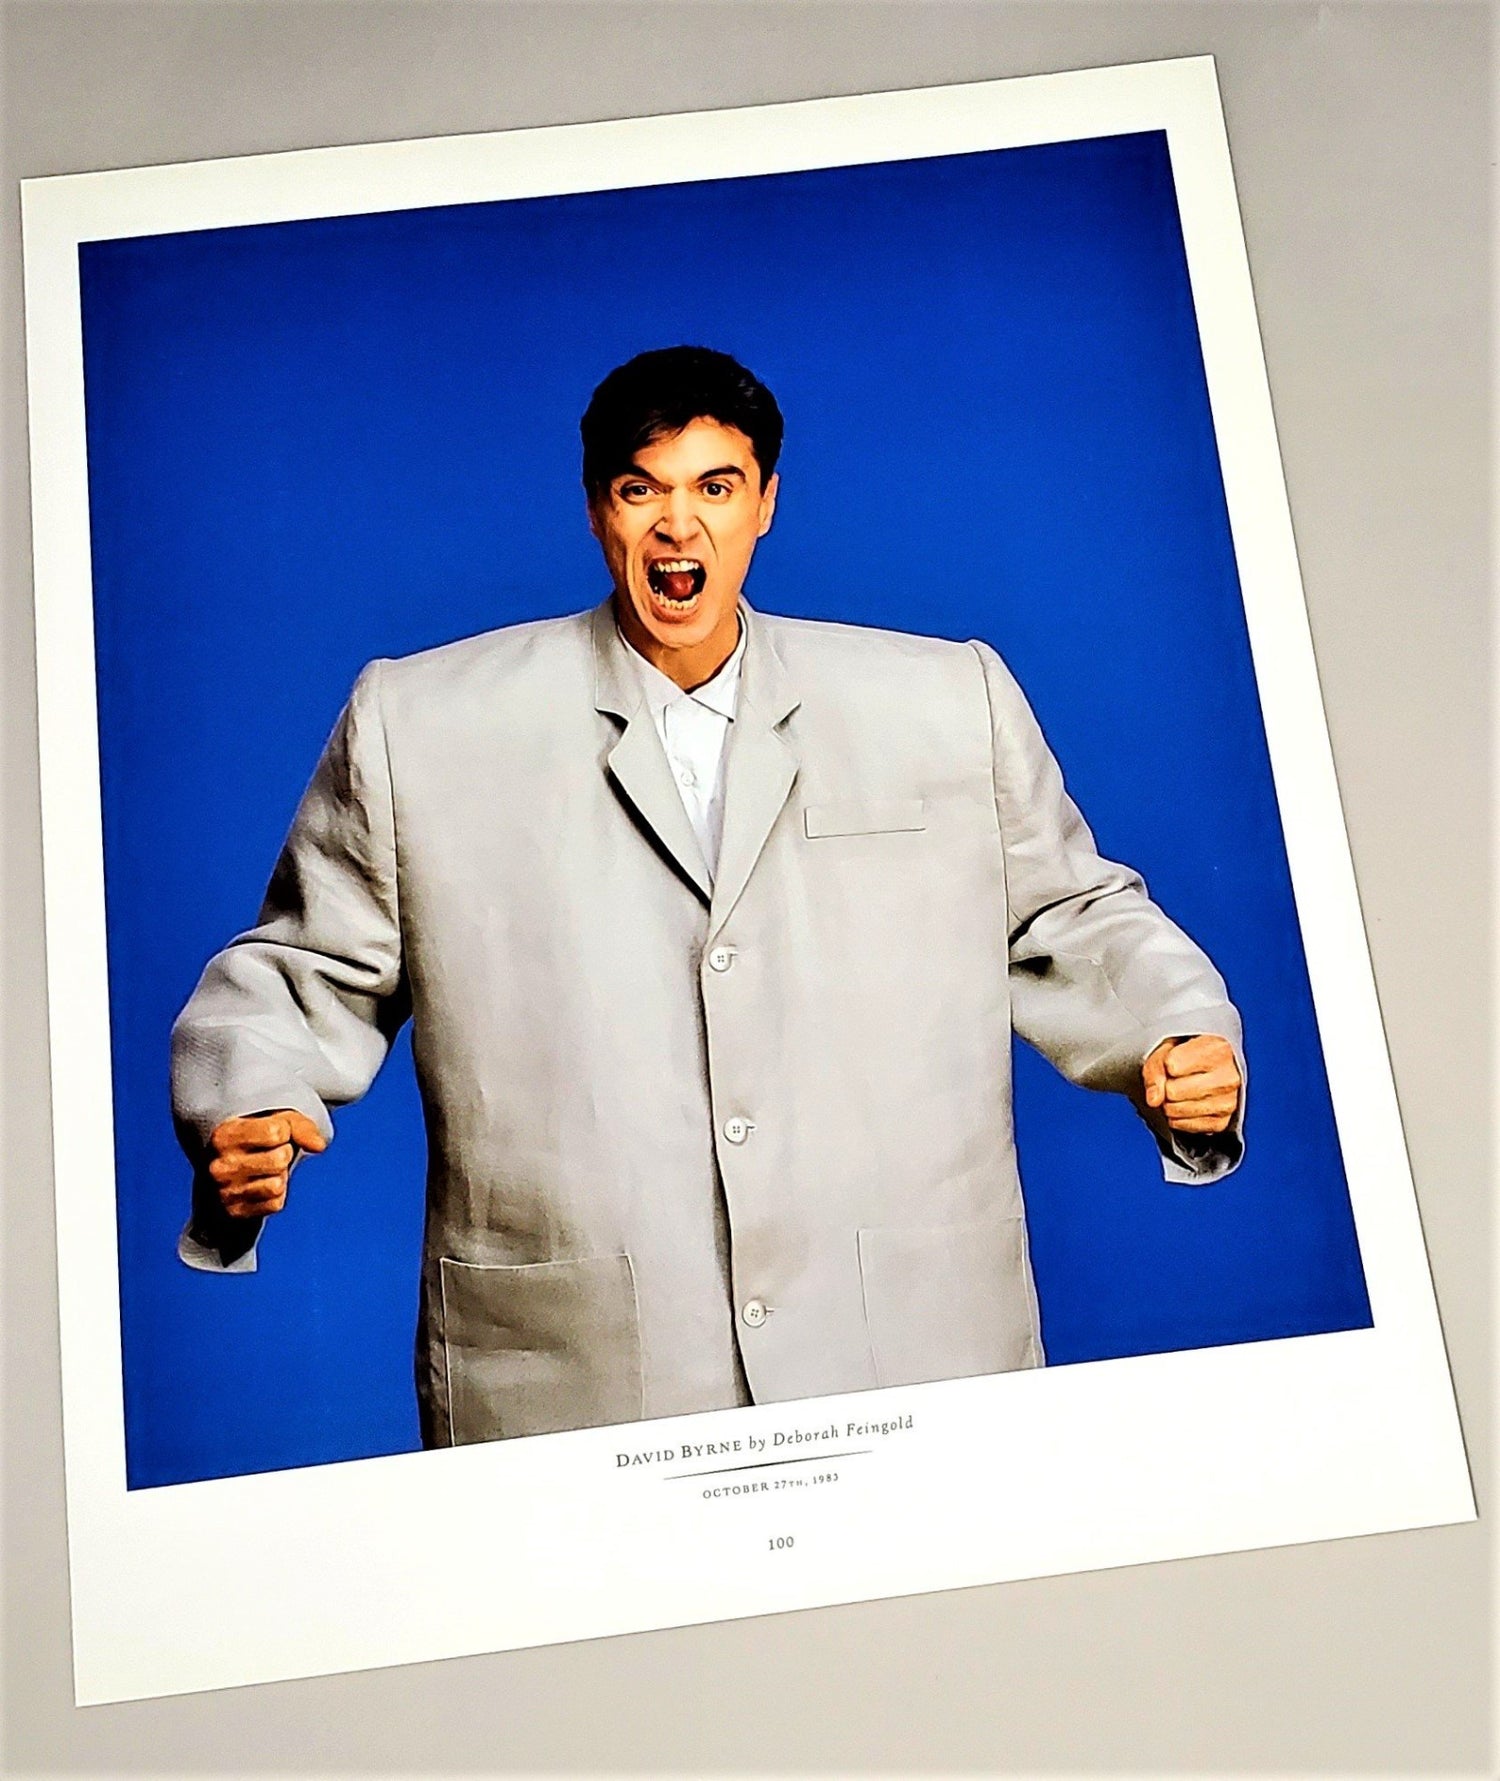 David Byrne photographed by Deborah Feingold in 1983 featured in Rolling Stone: The Photographs  